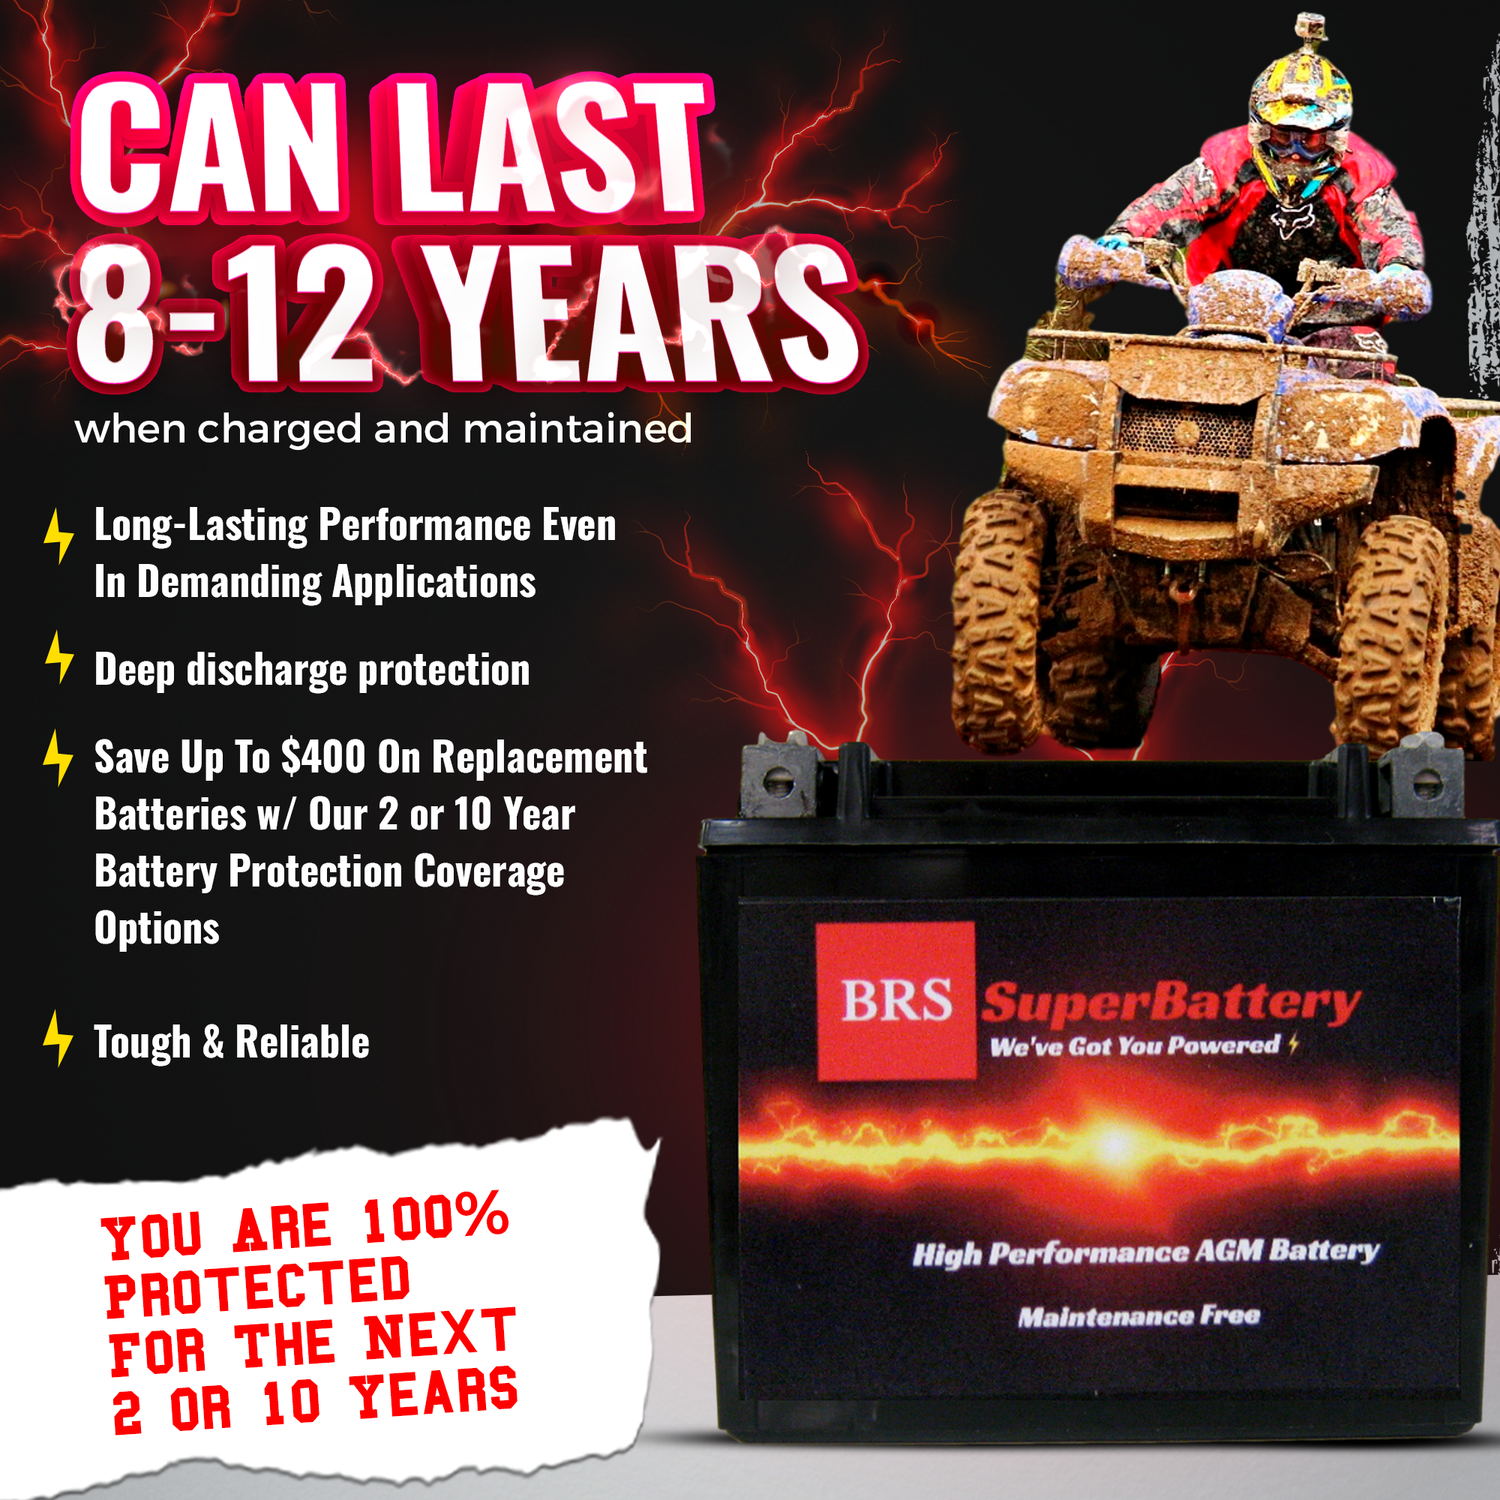 BRS30L-BS 12v High Performance Sealed AGM PowerSport 2 Year Battery - BRS Super Battery